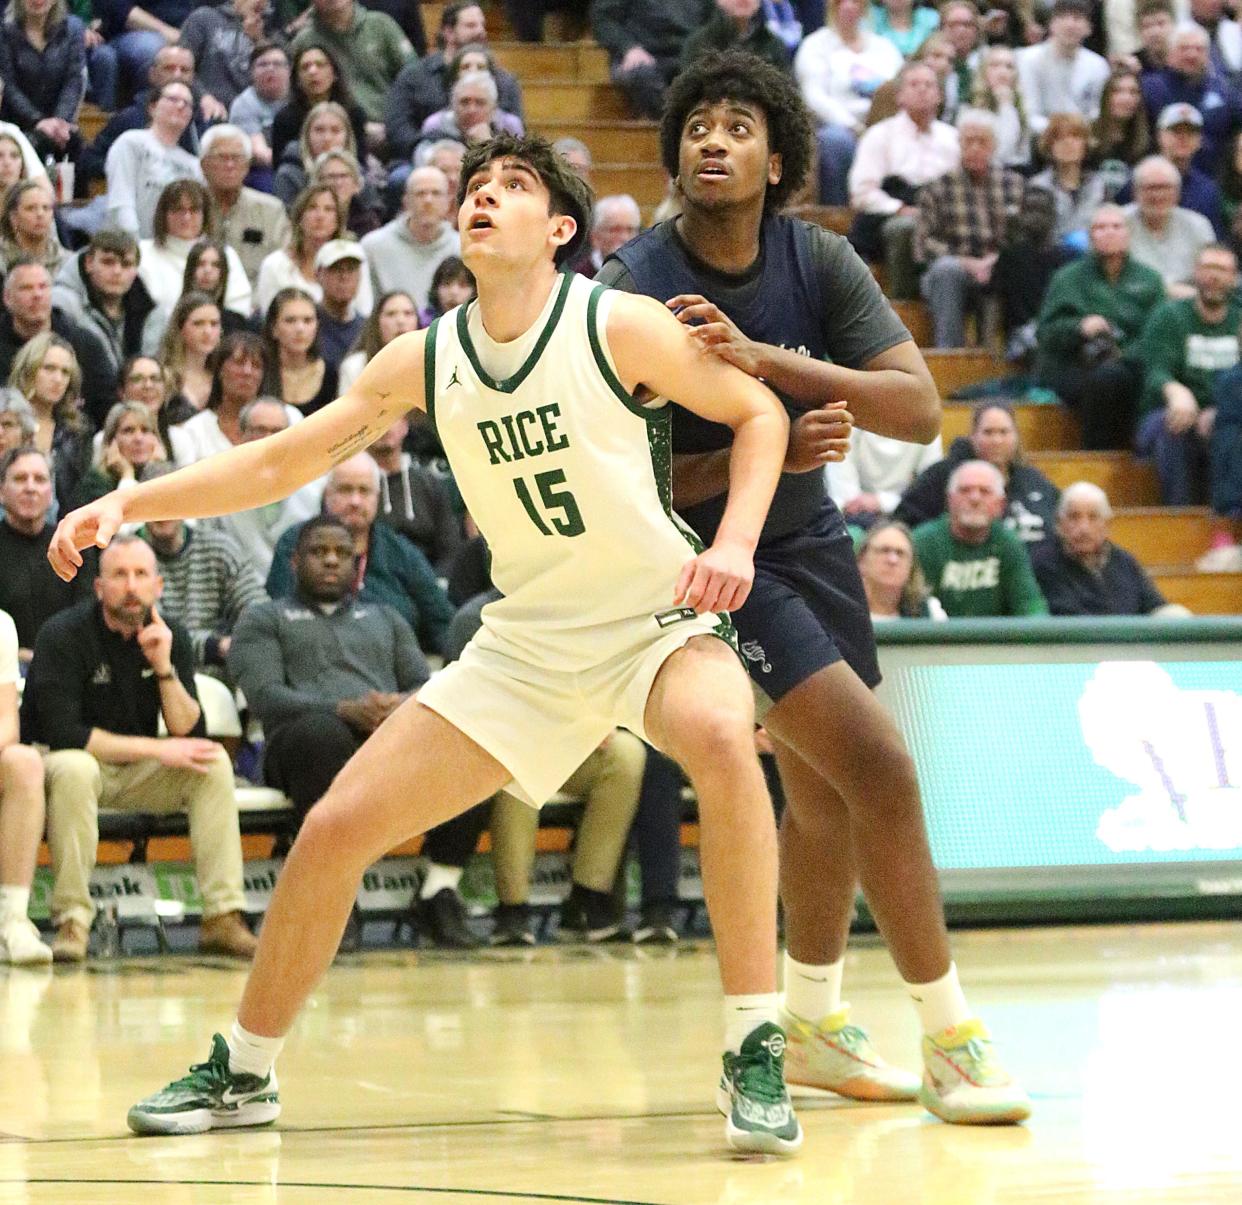 Rice's Drew Bessette and Burlington's Henry Tornwini battle for position during the Green Knights 66-63 win over the Seahorses in the 2024 D1 State Championship game at UVM's Patrick Gym.